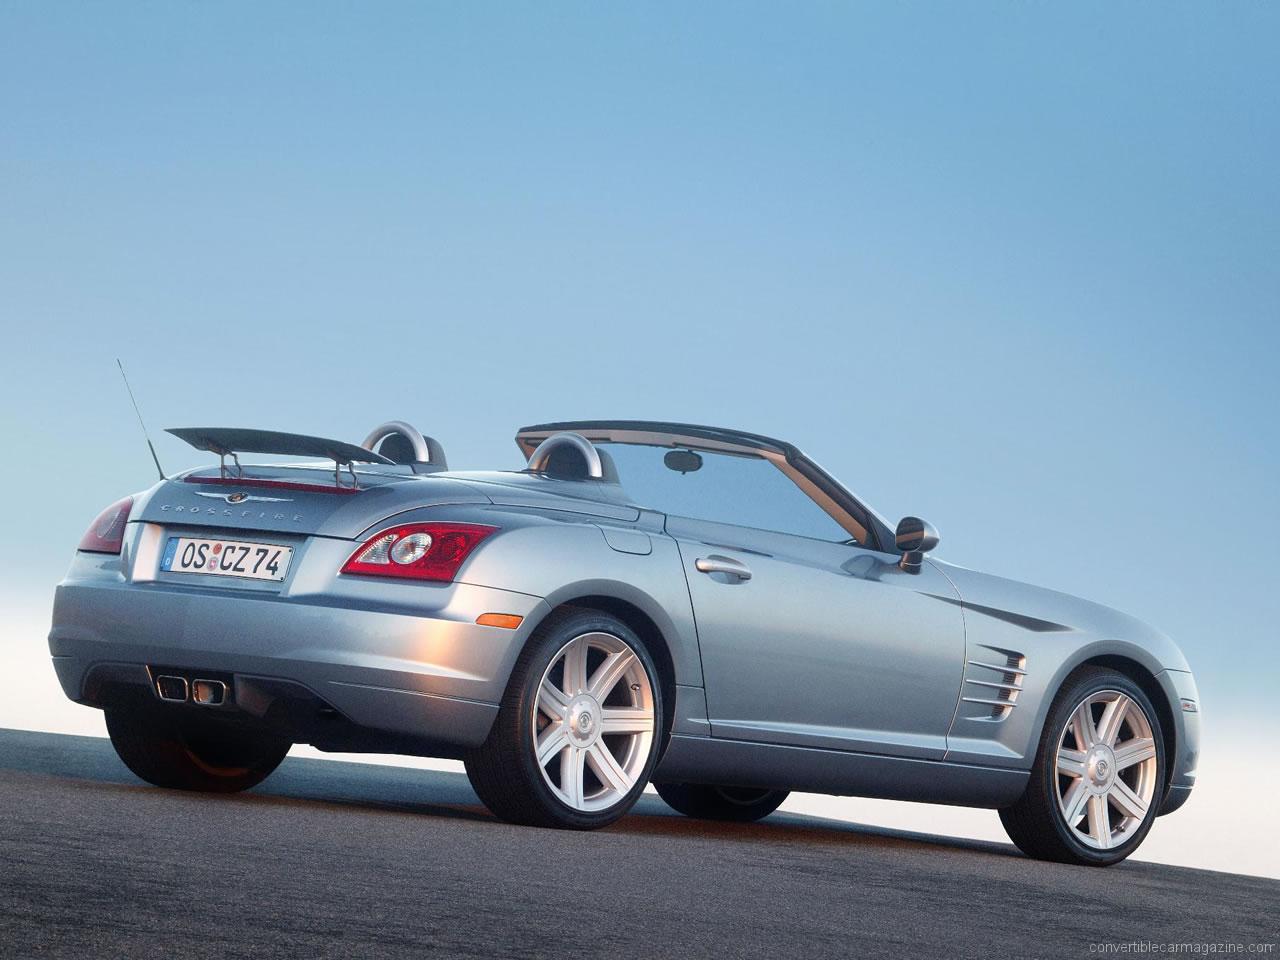 Chrysler crossfire production #3